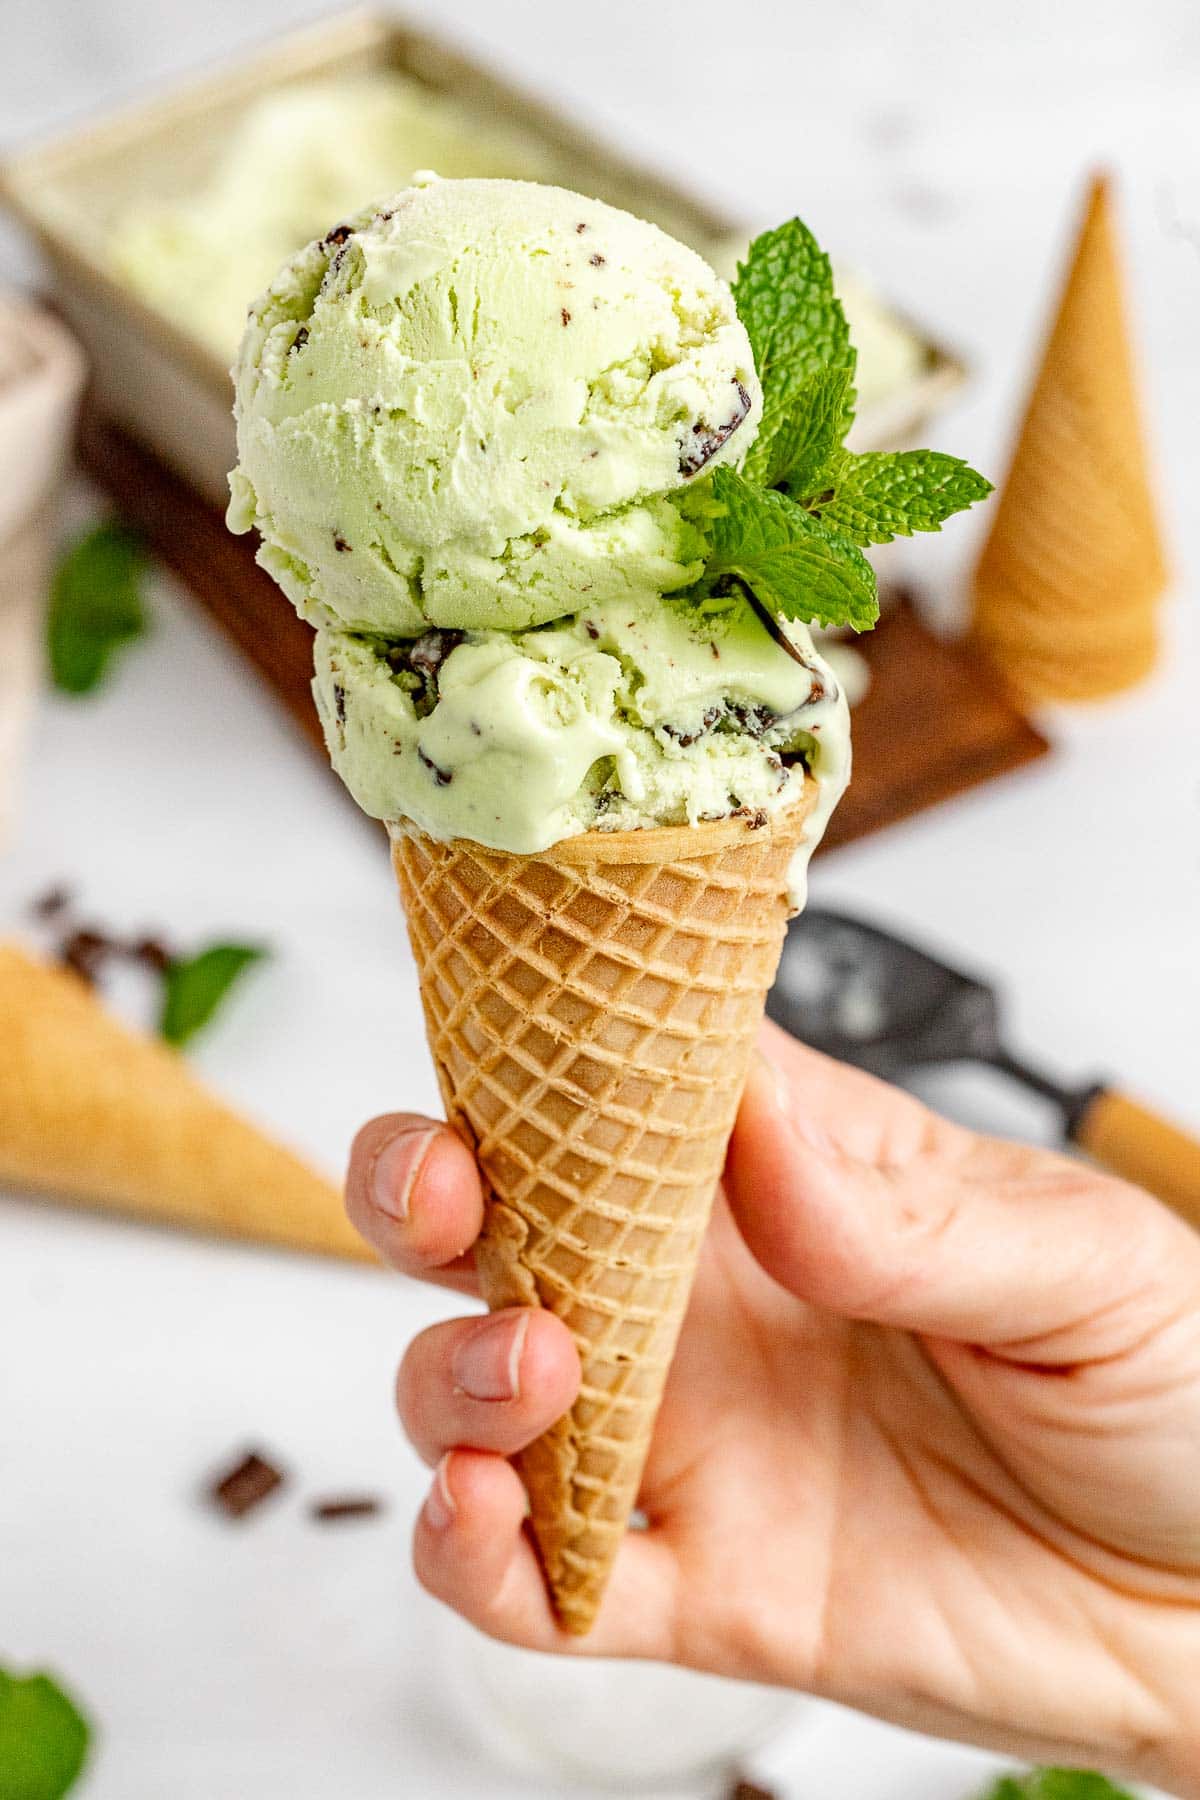 Mint Chocolate Chip Ice Cream two scoops in a sugar cone in hand